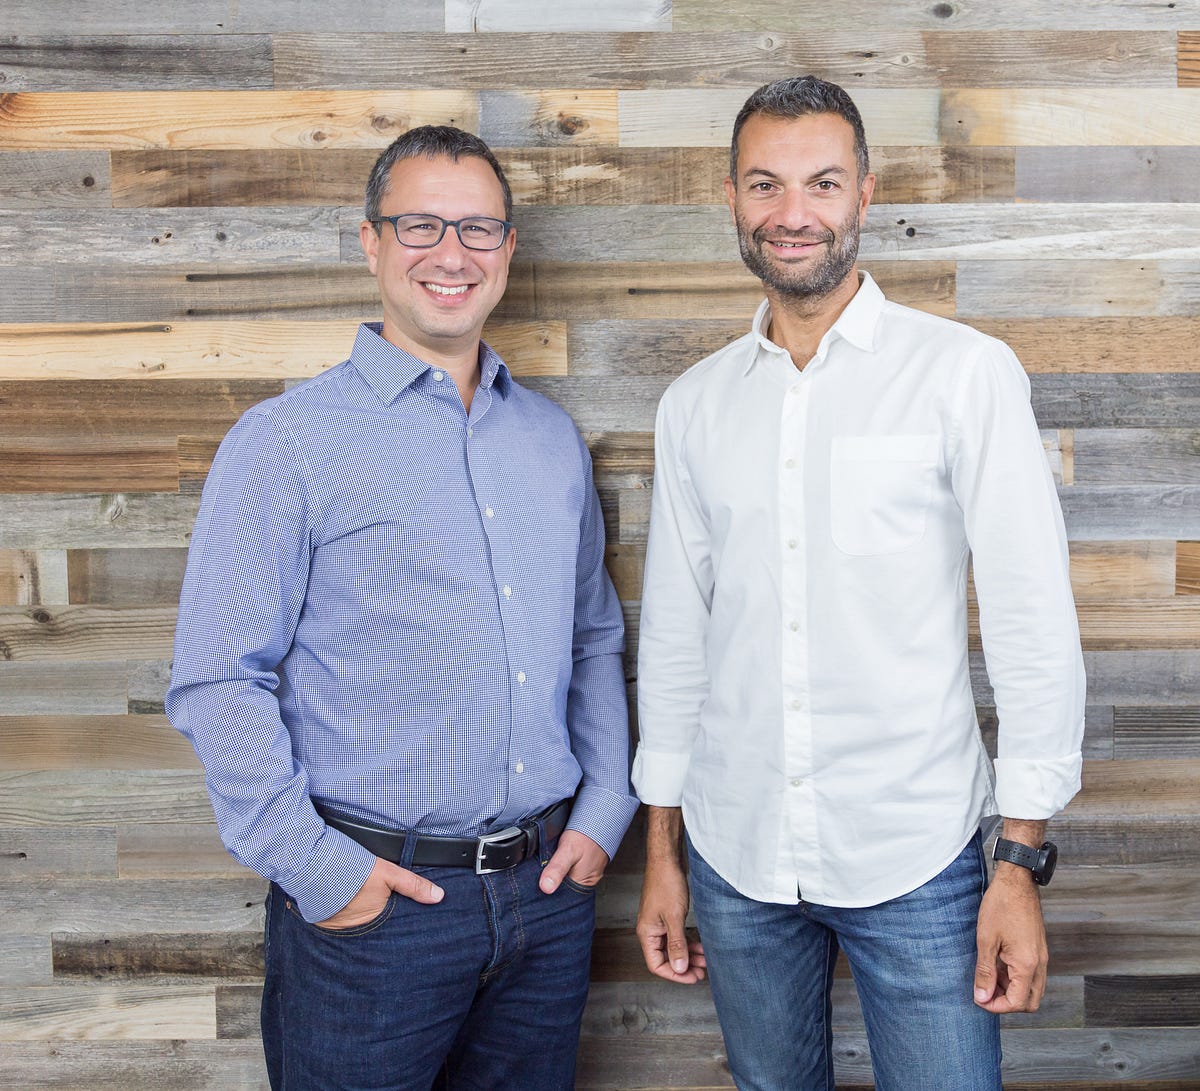 TripActions — An outlier company just raised another $250M to continue ...